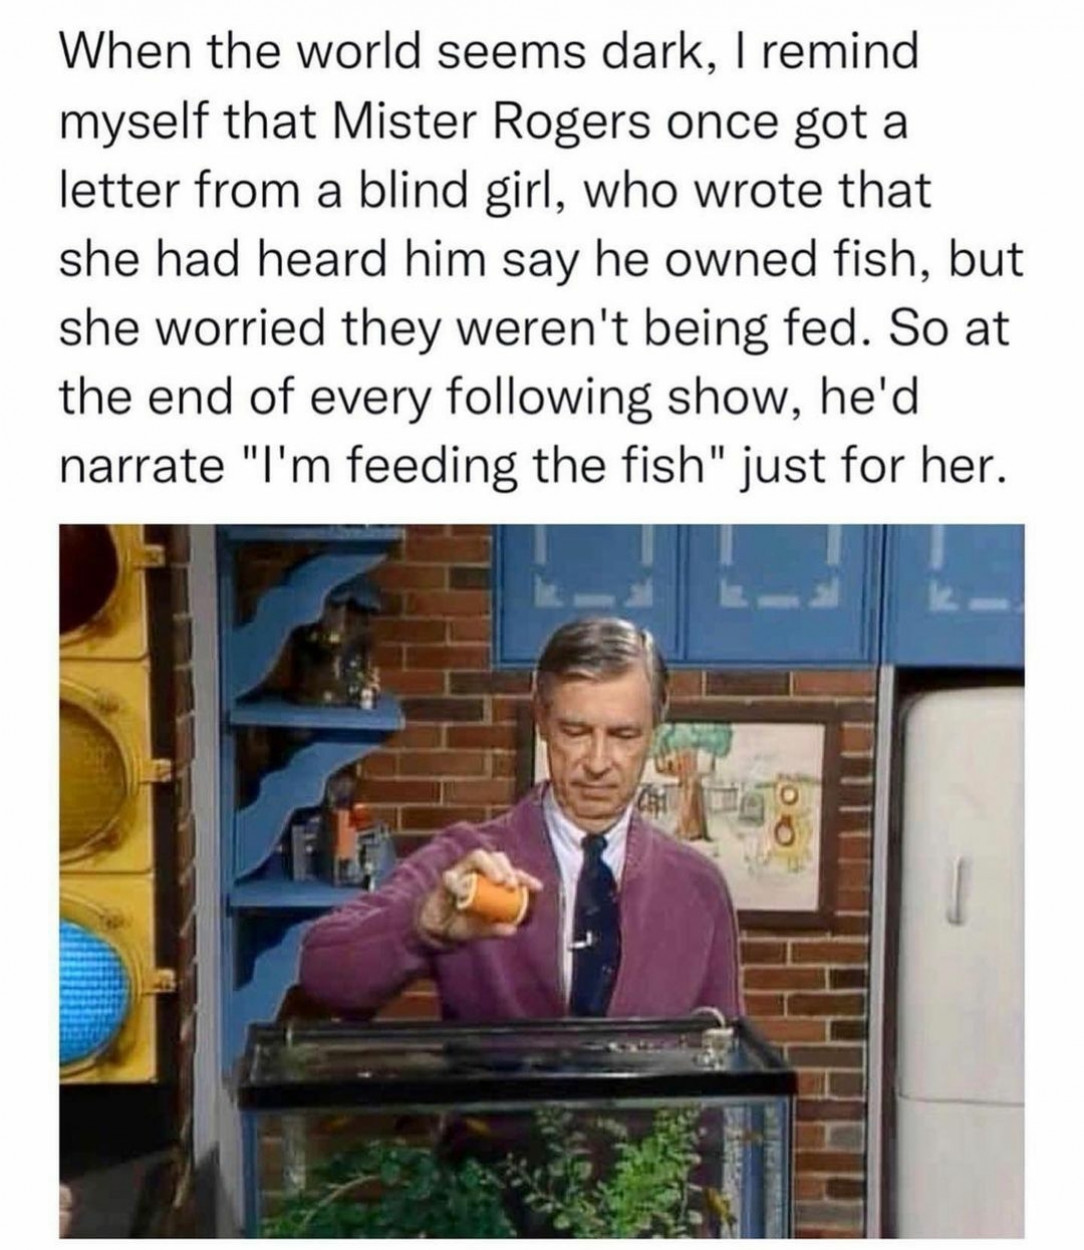 Mister Rogers being great will never get old